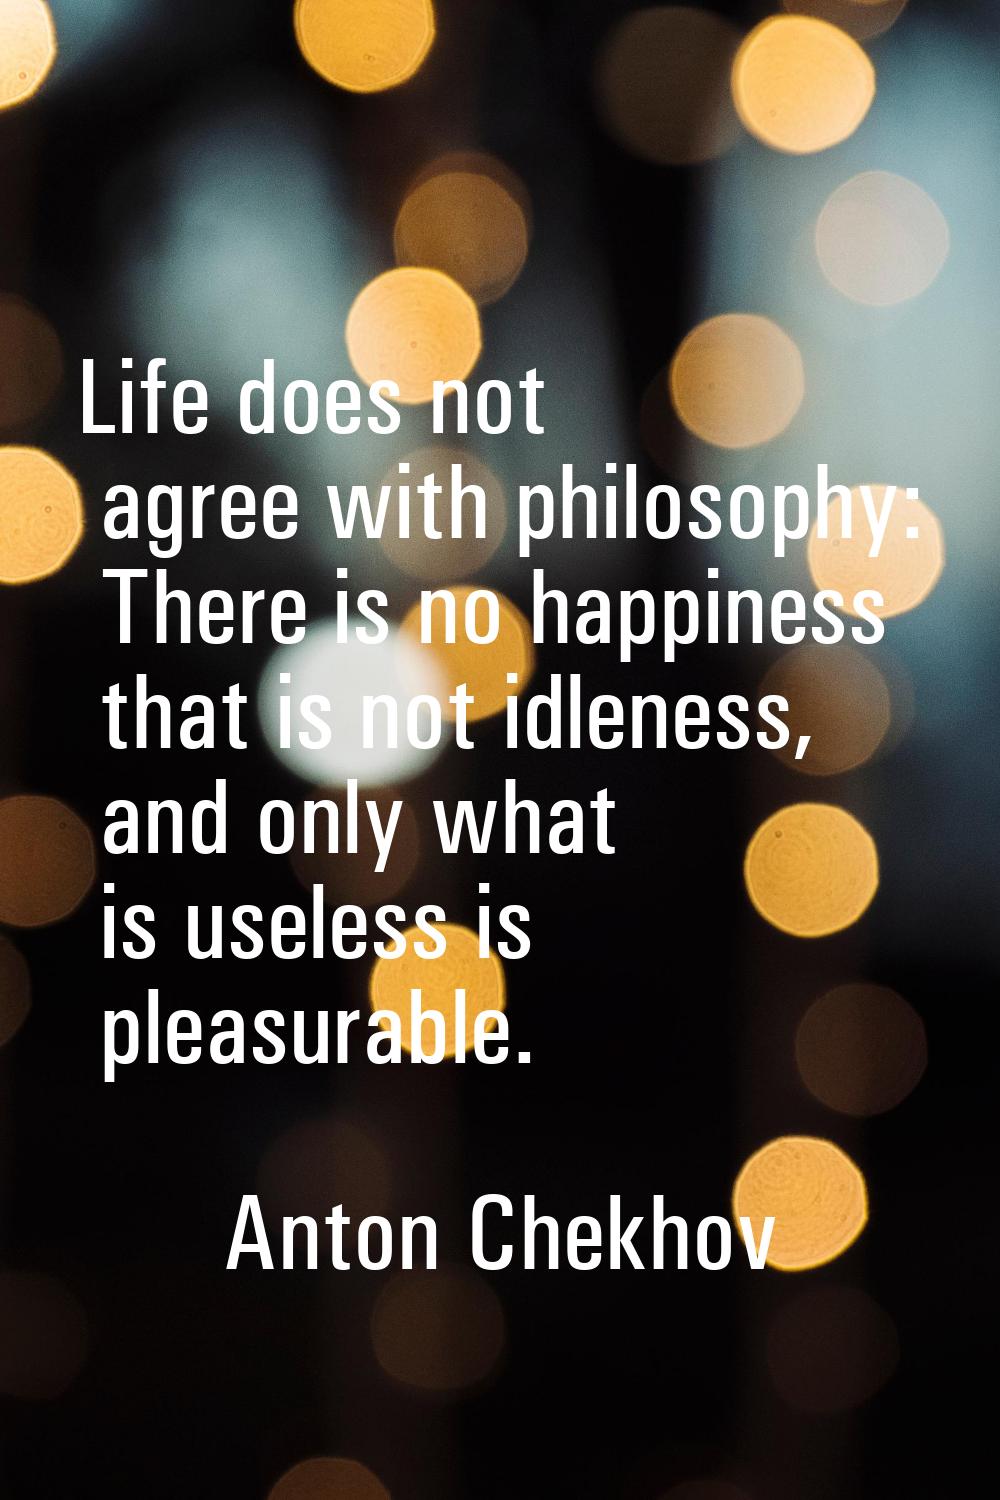 Life does not agree with philosophy: There is no happiness that is not idleness, and only what is u